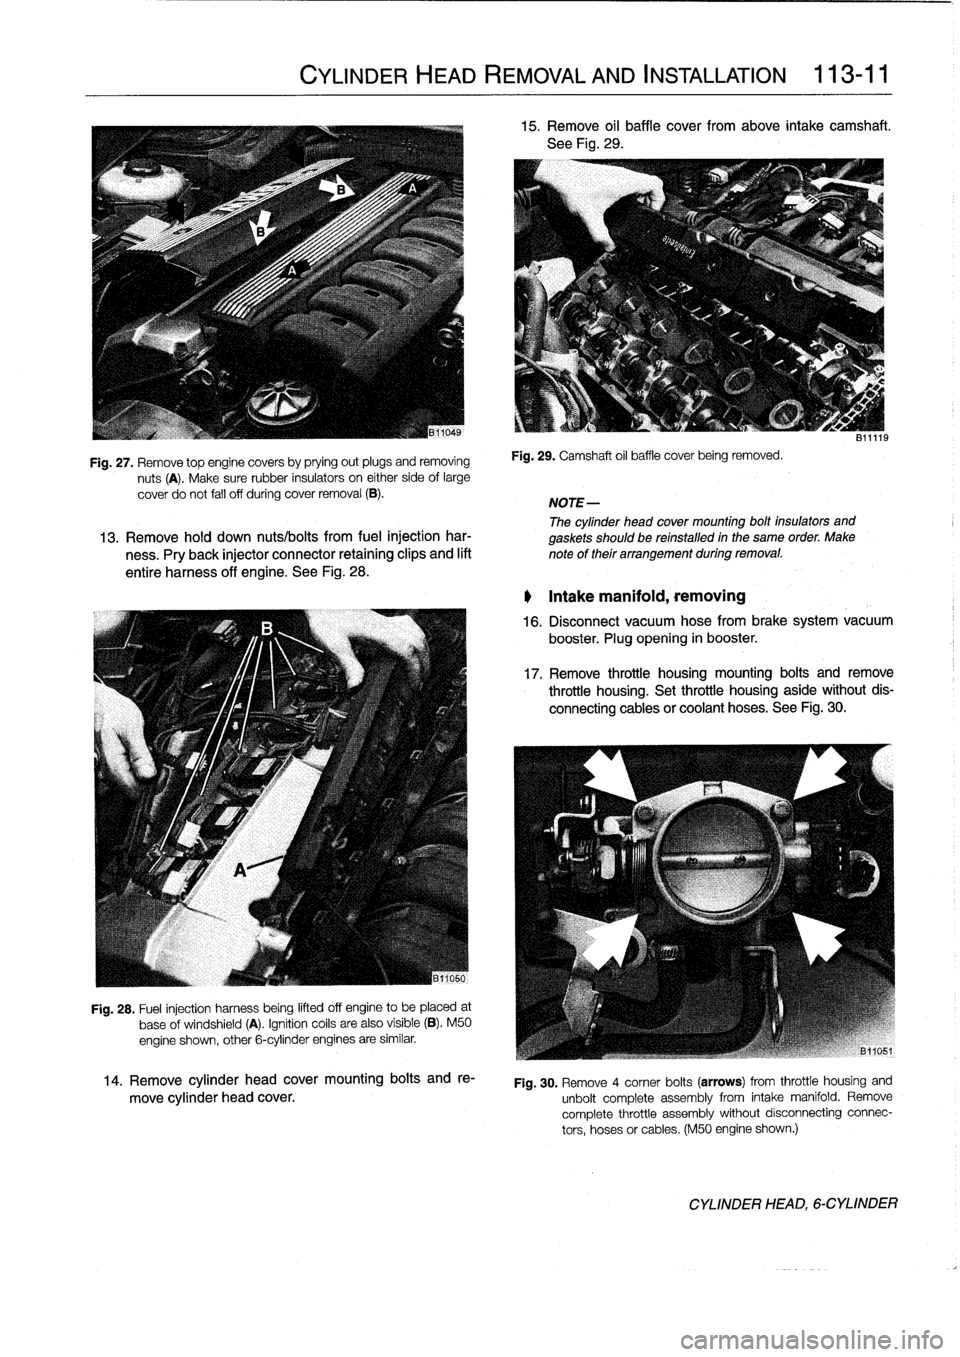 BMW 325i 1994 E36 Workshop Manual 
Fig
.
27
.
Remove
top
enginecovers
by
prying
out
plugs
and
removing

nuts
(A)
.
Make
sure
rubber
insulators
on
either
side
of
large

cover
do
not
fall
off
during
cover
removal
(B)
.

Fig
.
28
.
Fuel
